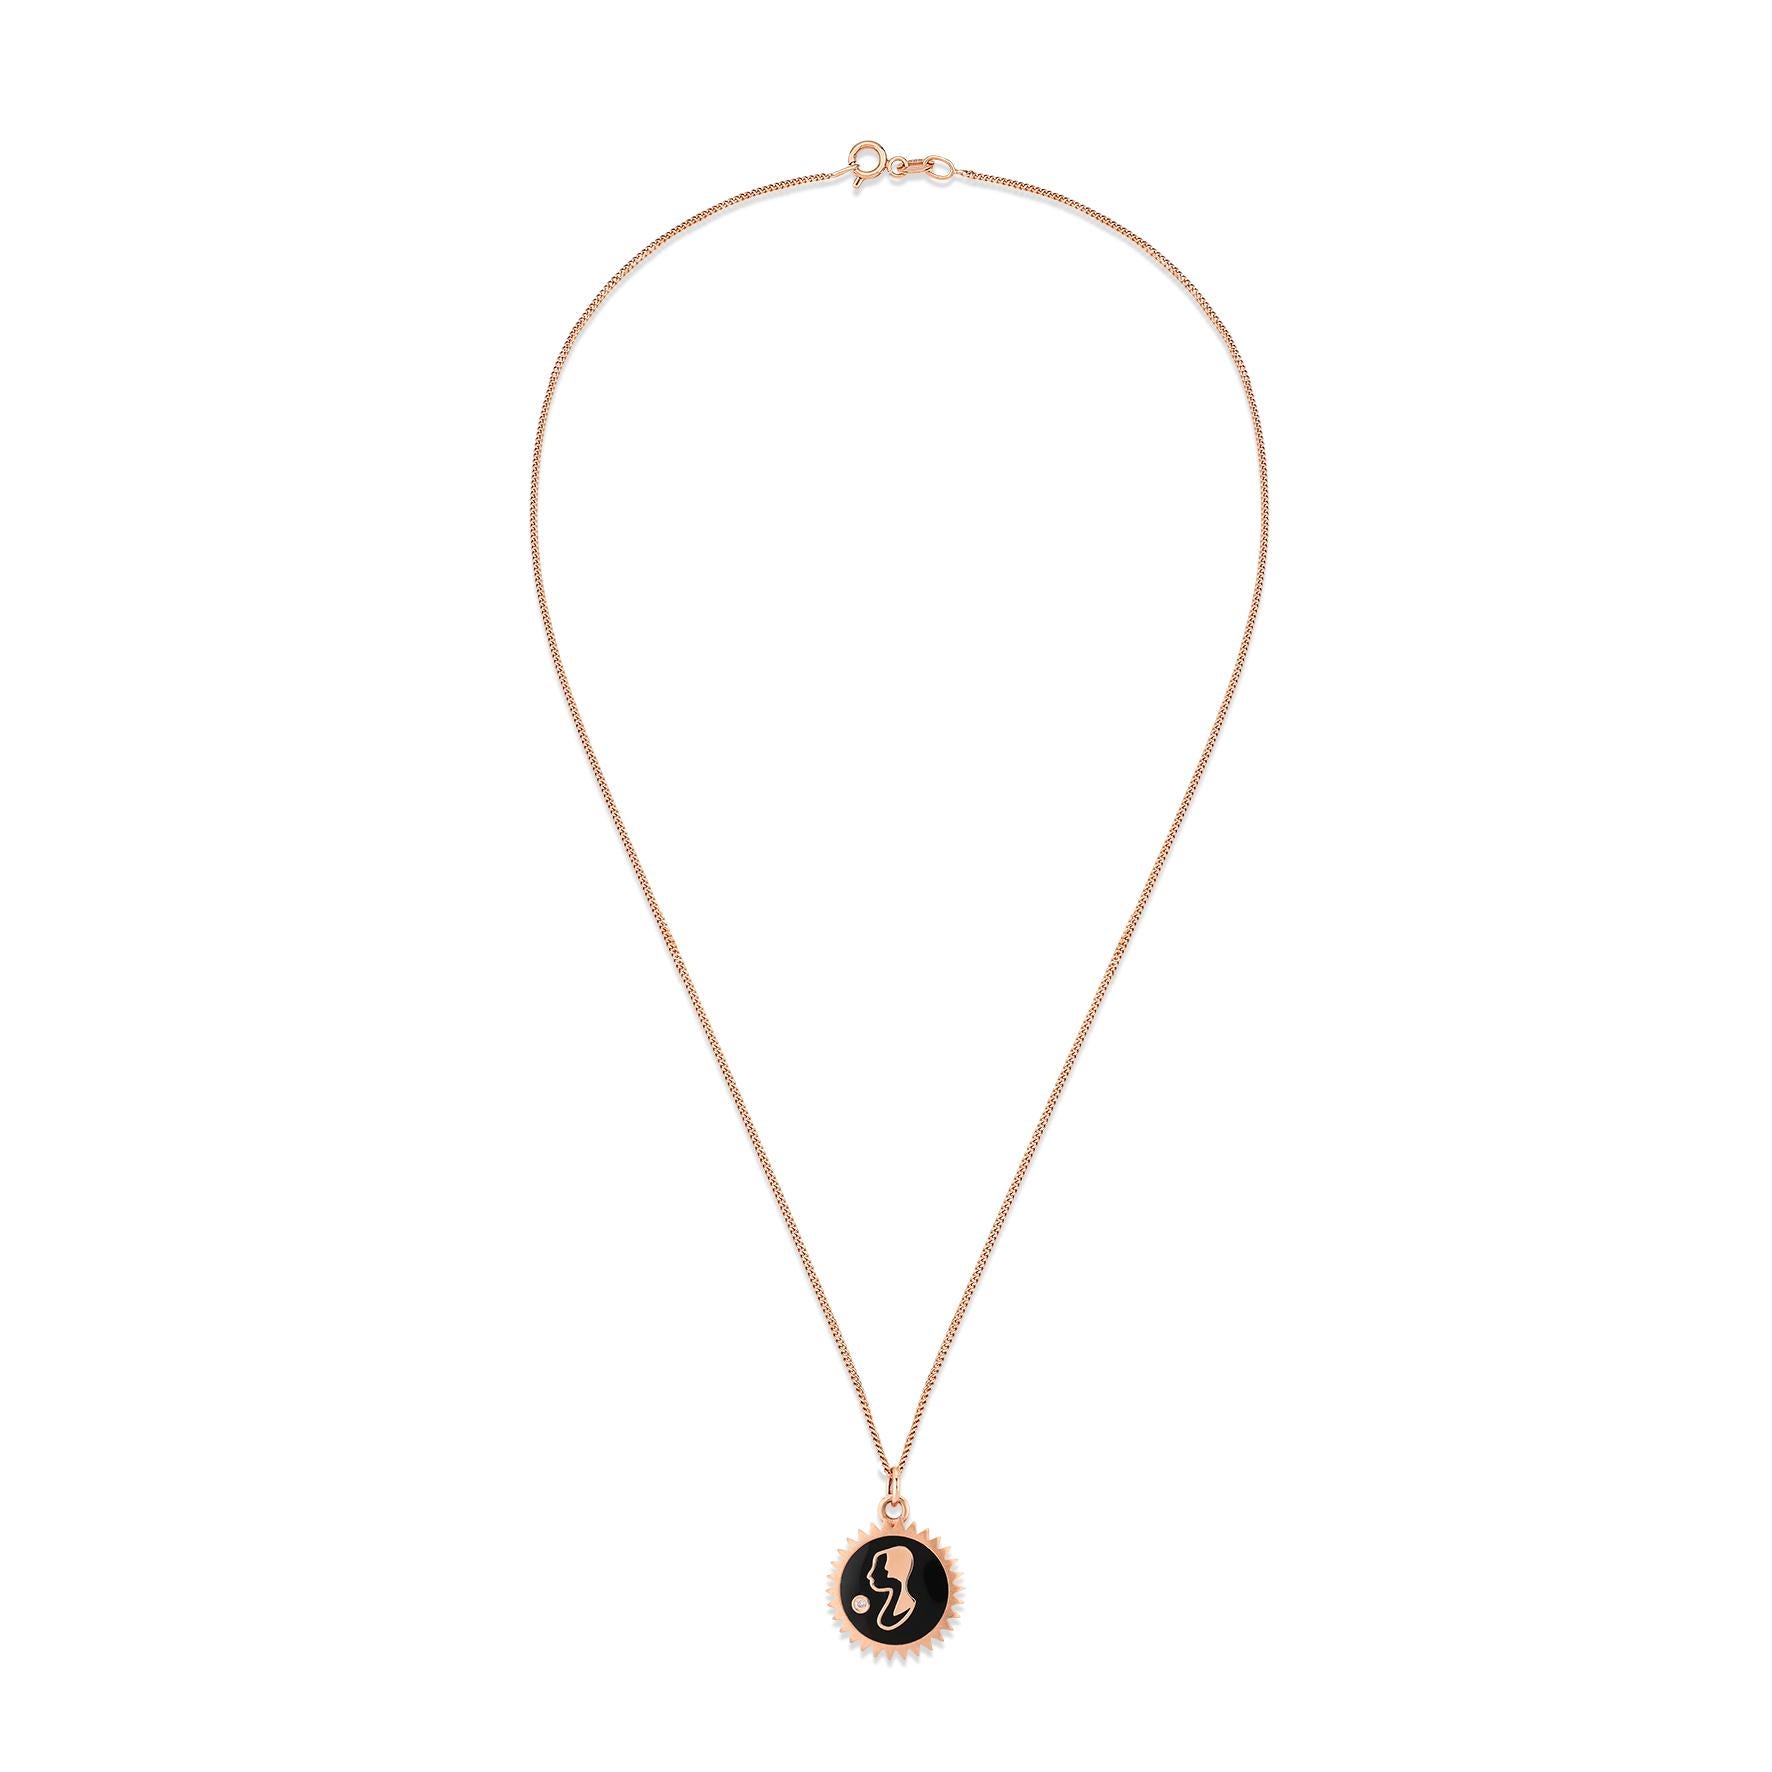 Gemini necklace with black enamel and 0.01ct white diamond by Selda Jewellery

Additional Information:-
Collection: Zodiac collection
14K Rose gold
0.01ct White diamond
Pendant height 1cm
Chain length 40cm